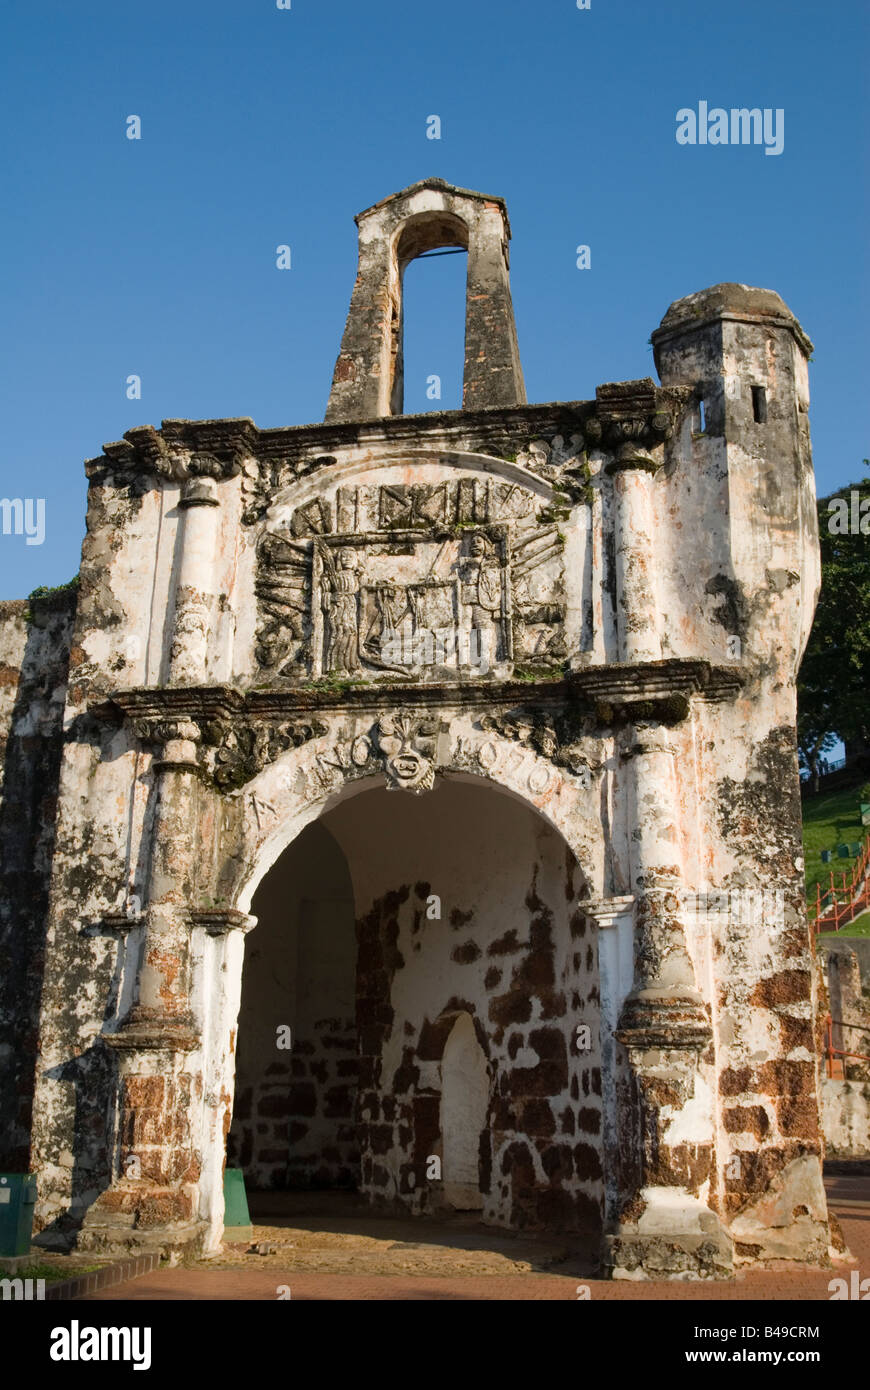 The arched gate, Porta de Santiago, of A Famosa originally constructed by the Portuguese in 1511, then restored by the Dutch in Malacca, Malaysia Stock Photo